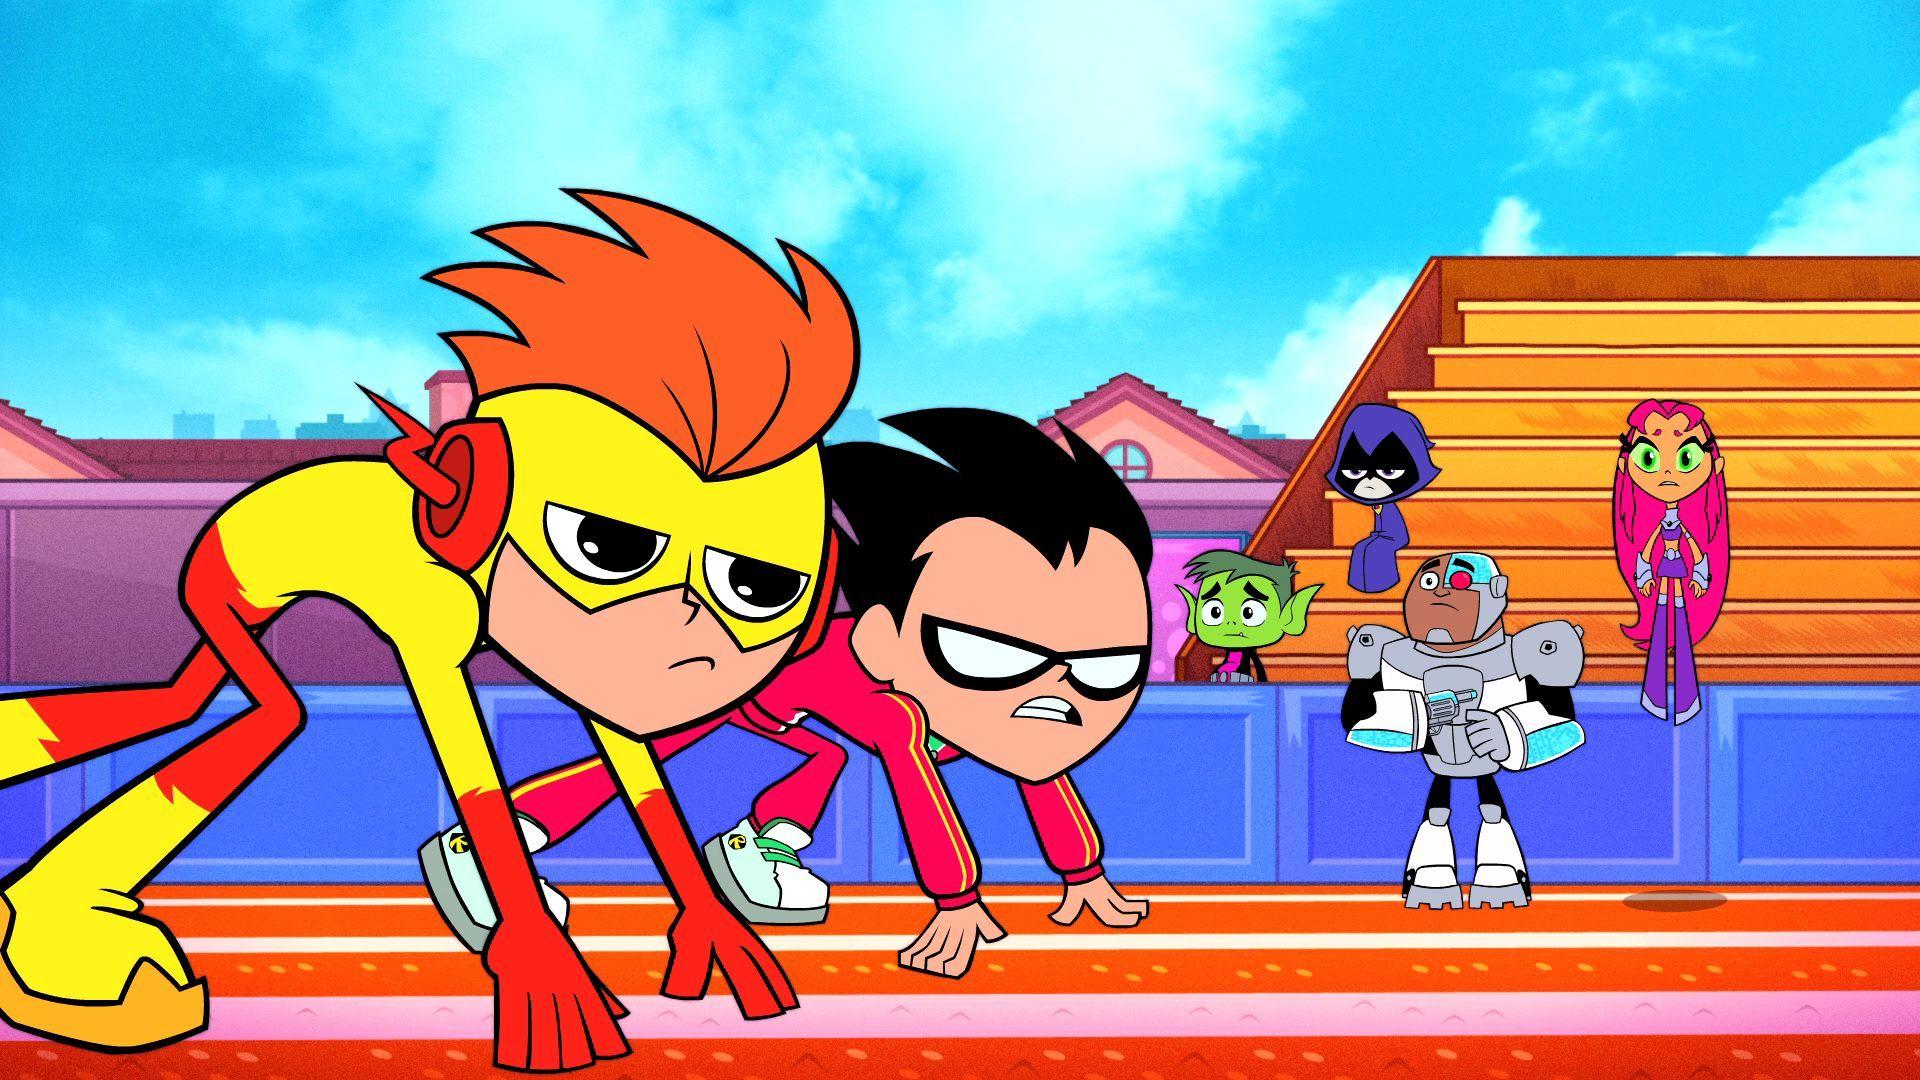 Wallpaper.wiki Download Free Teen Titans Go Background PIC WPE00623